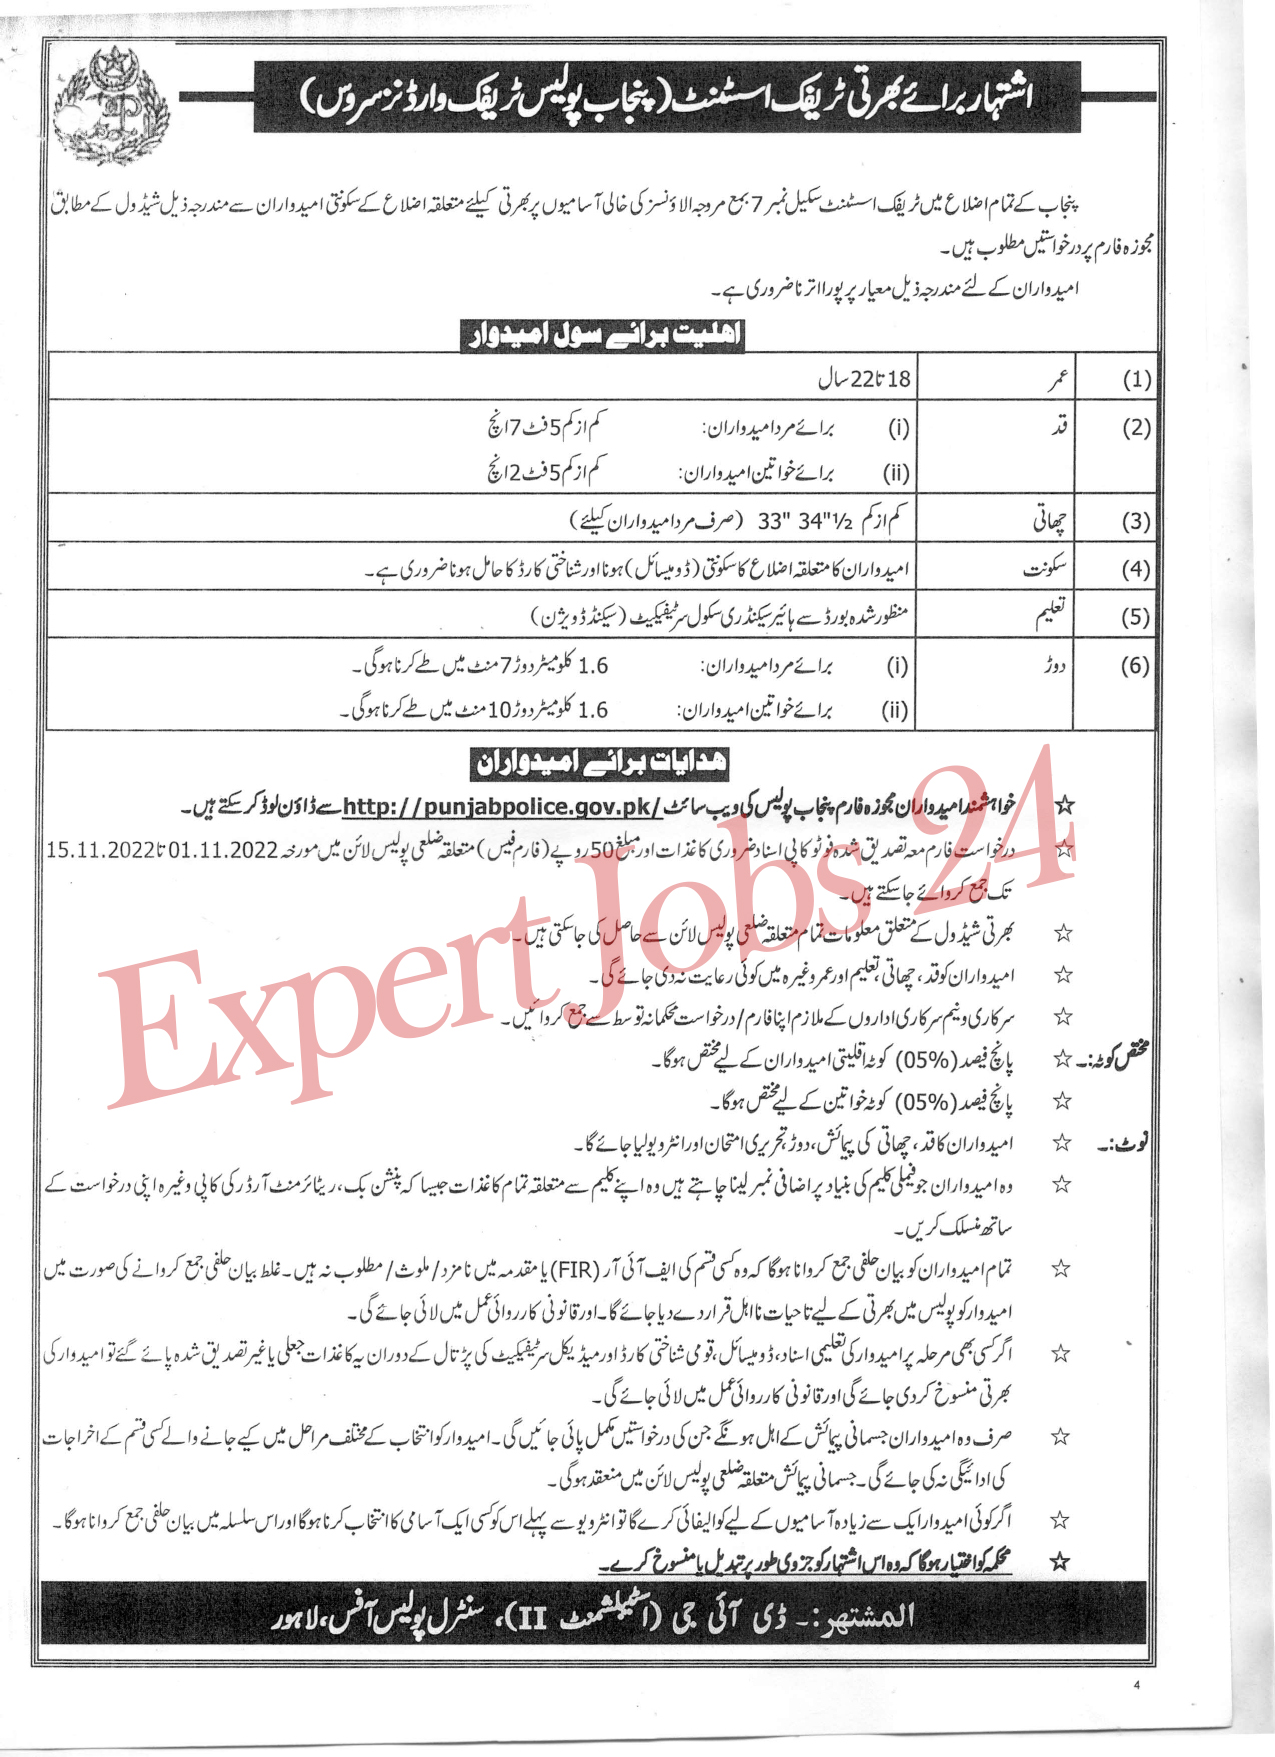 How to Apply For Punjab Police Jobs